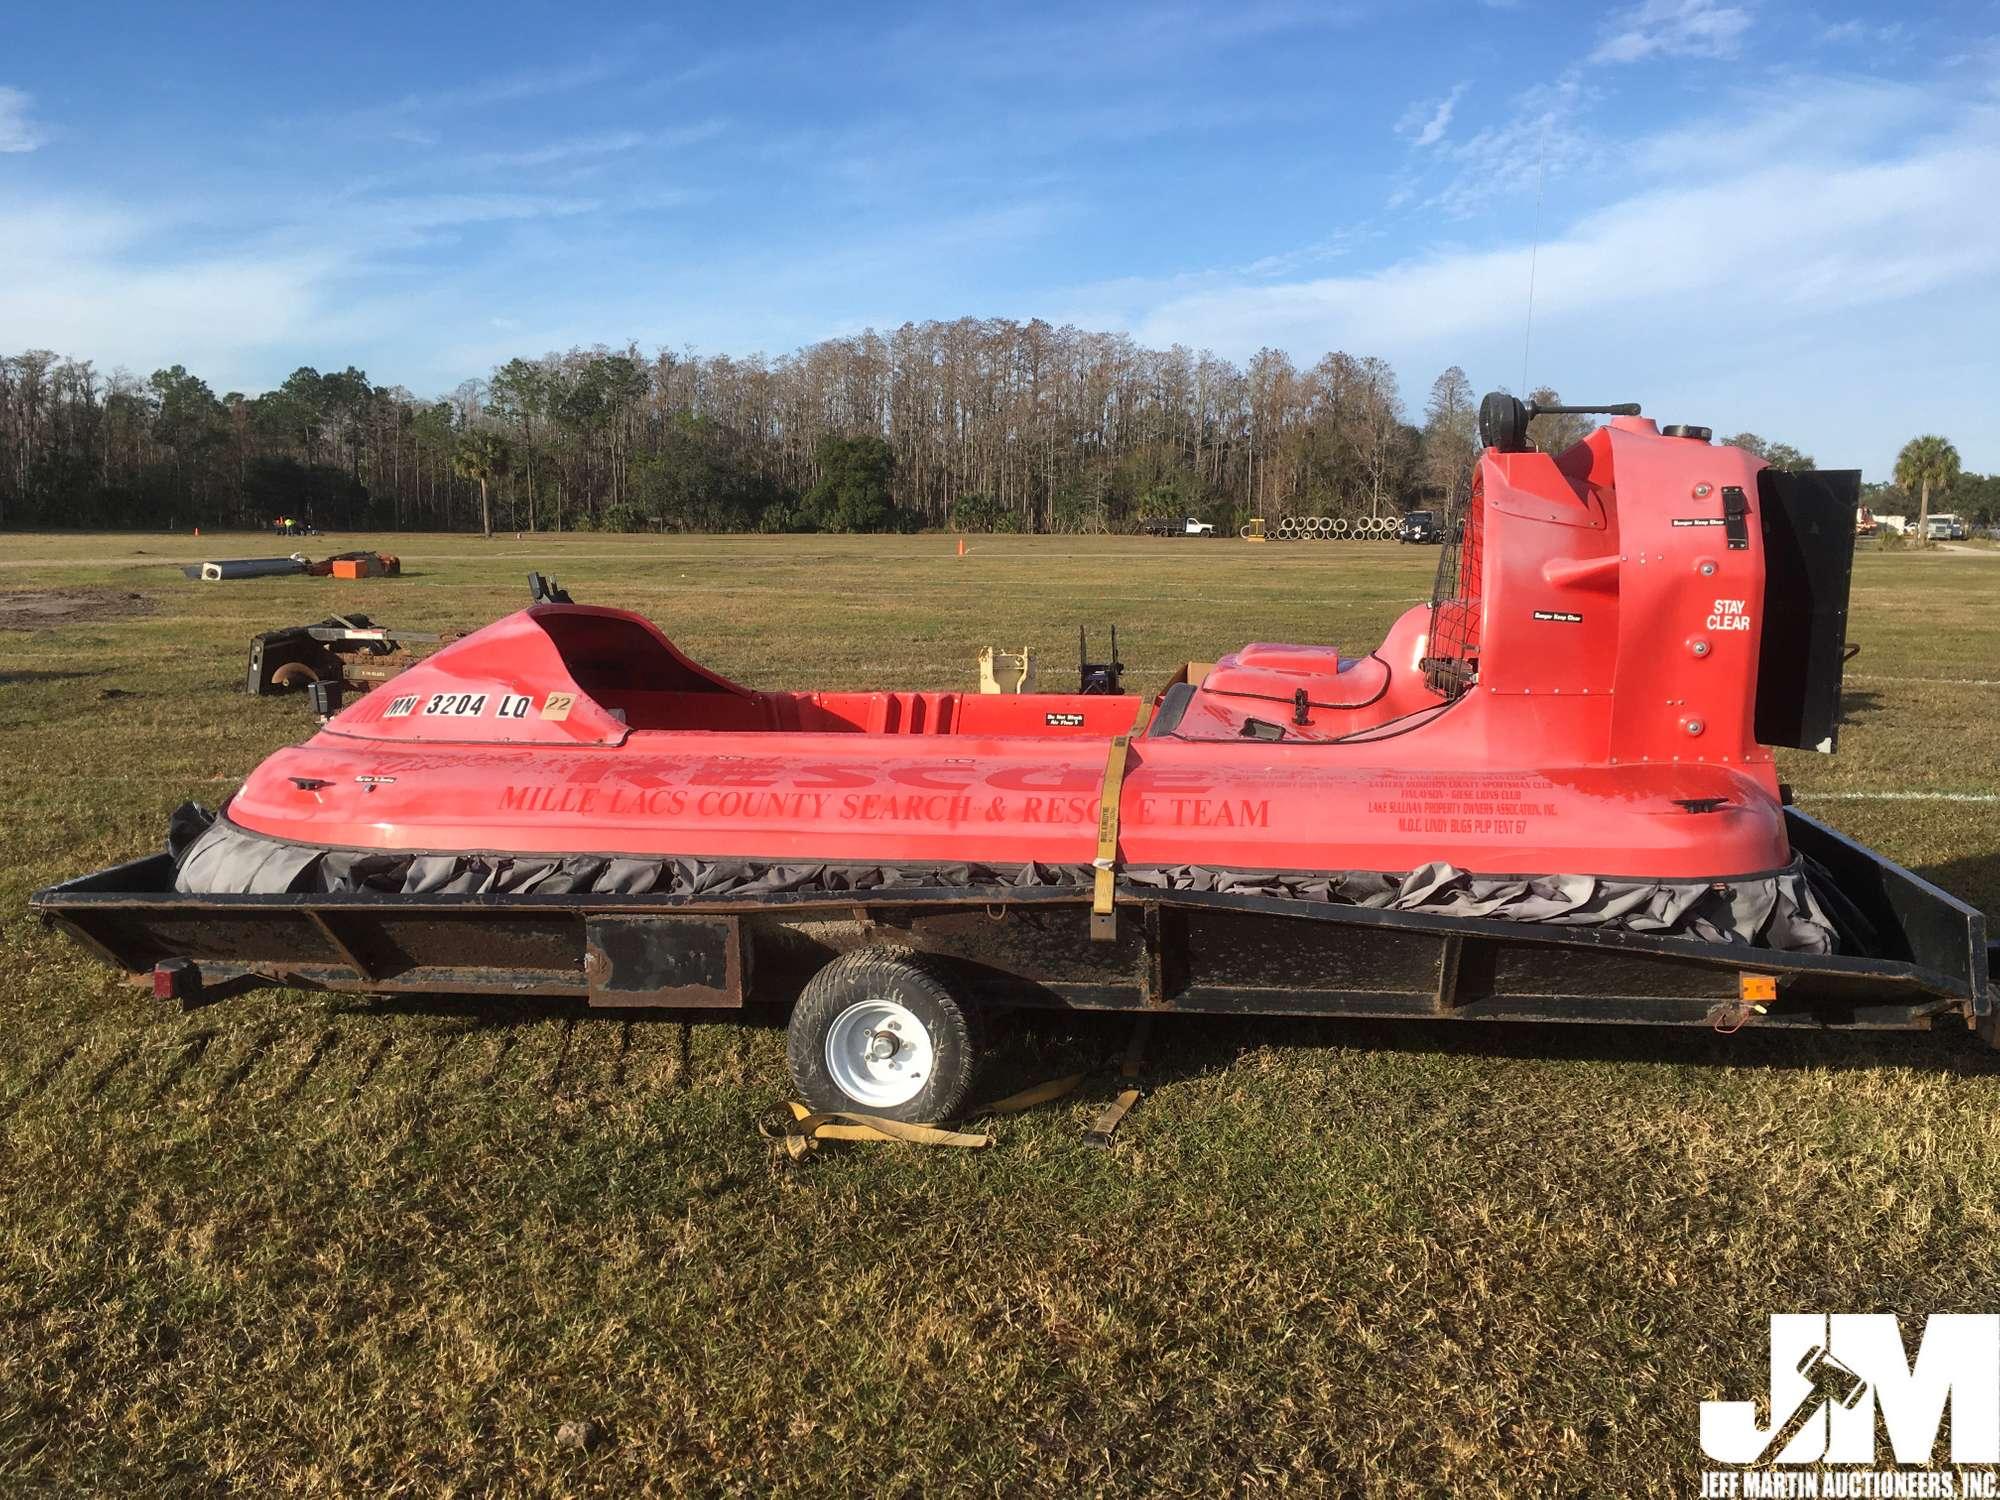 1996 HOVER CRAFT USA 5 SEAT HOVER CRAFT/RESCUE BOAT